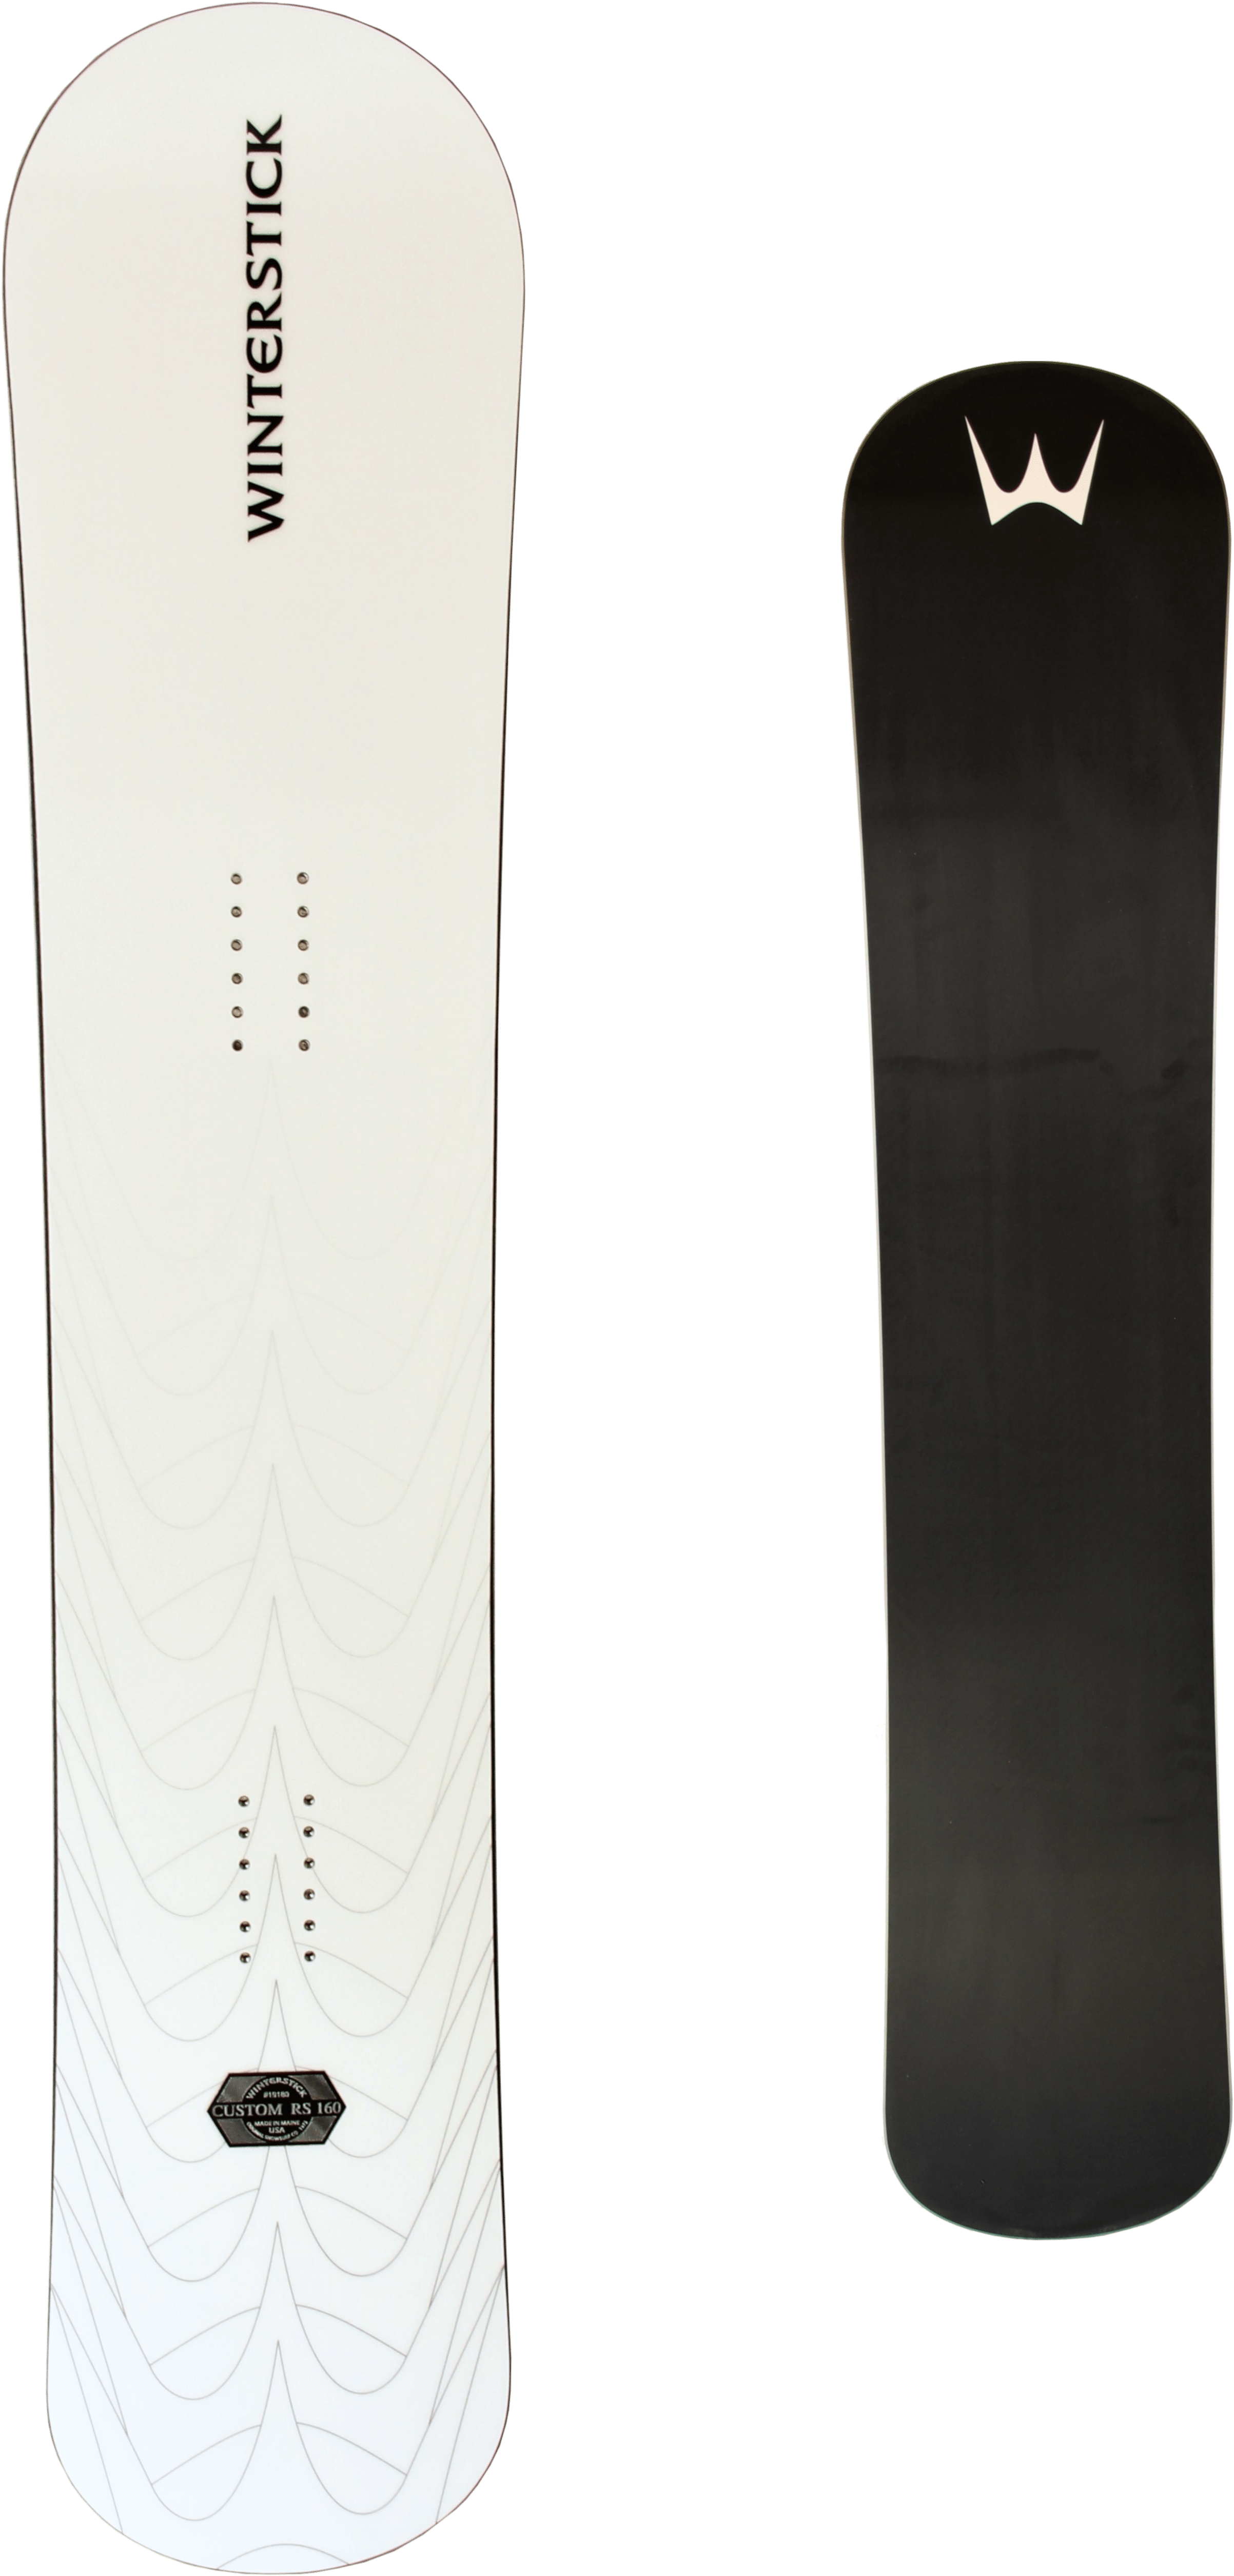 A Black And White Snowboard